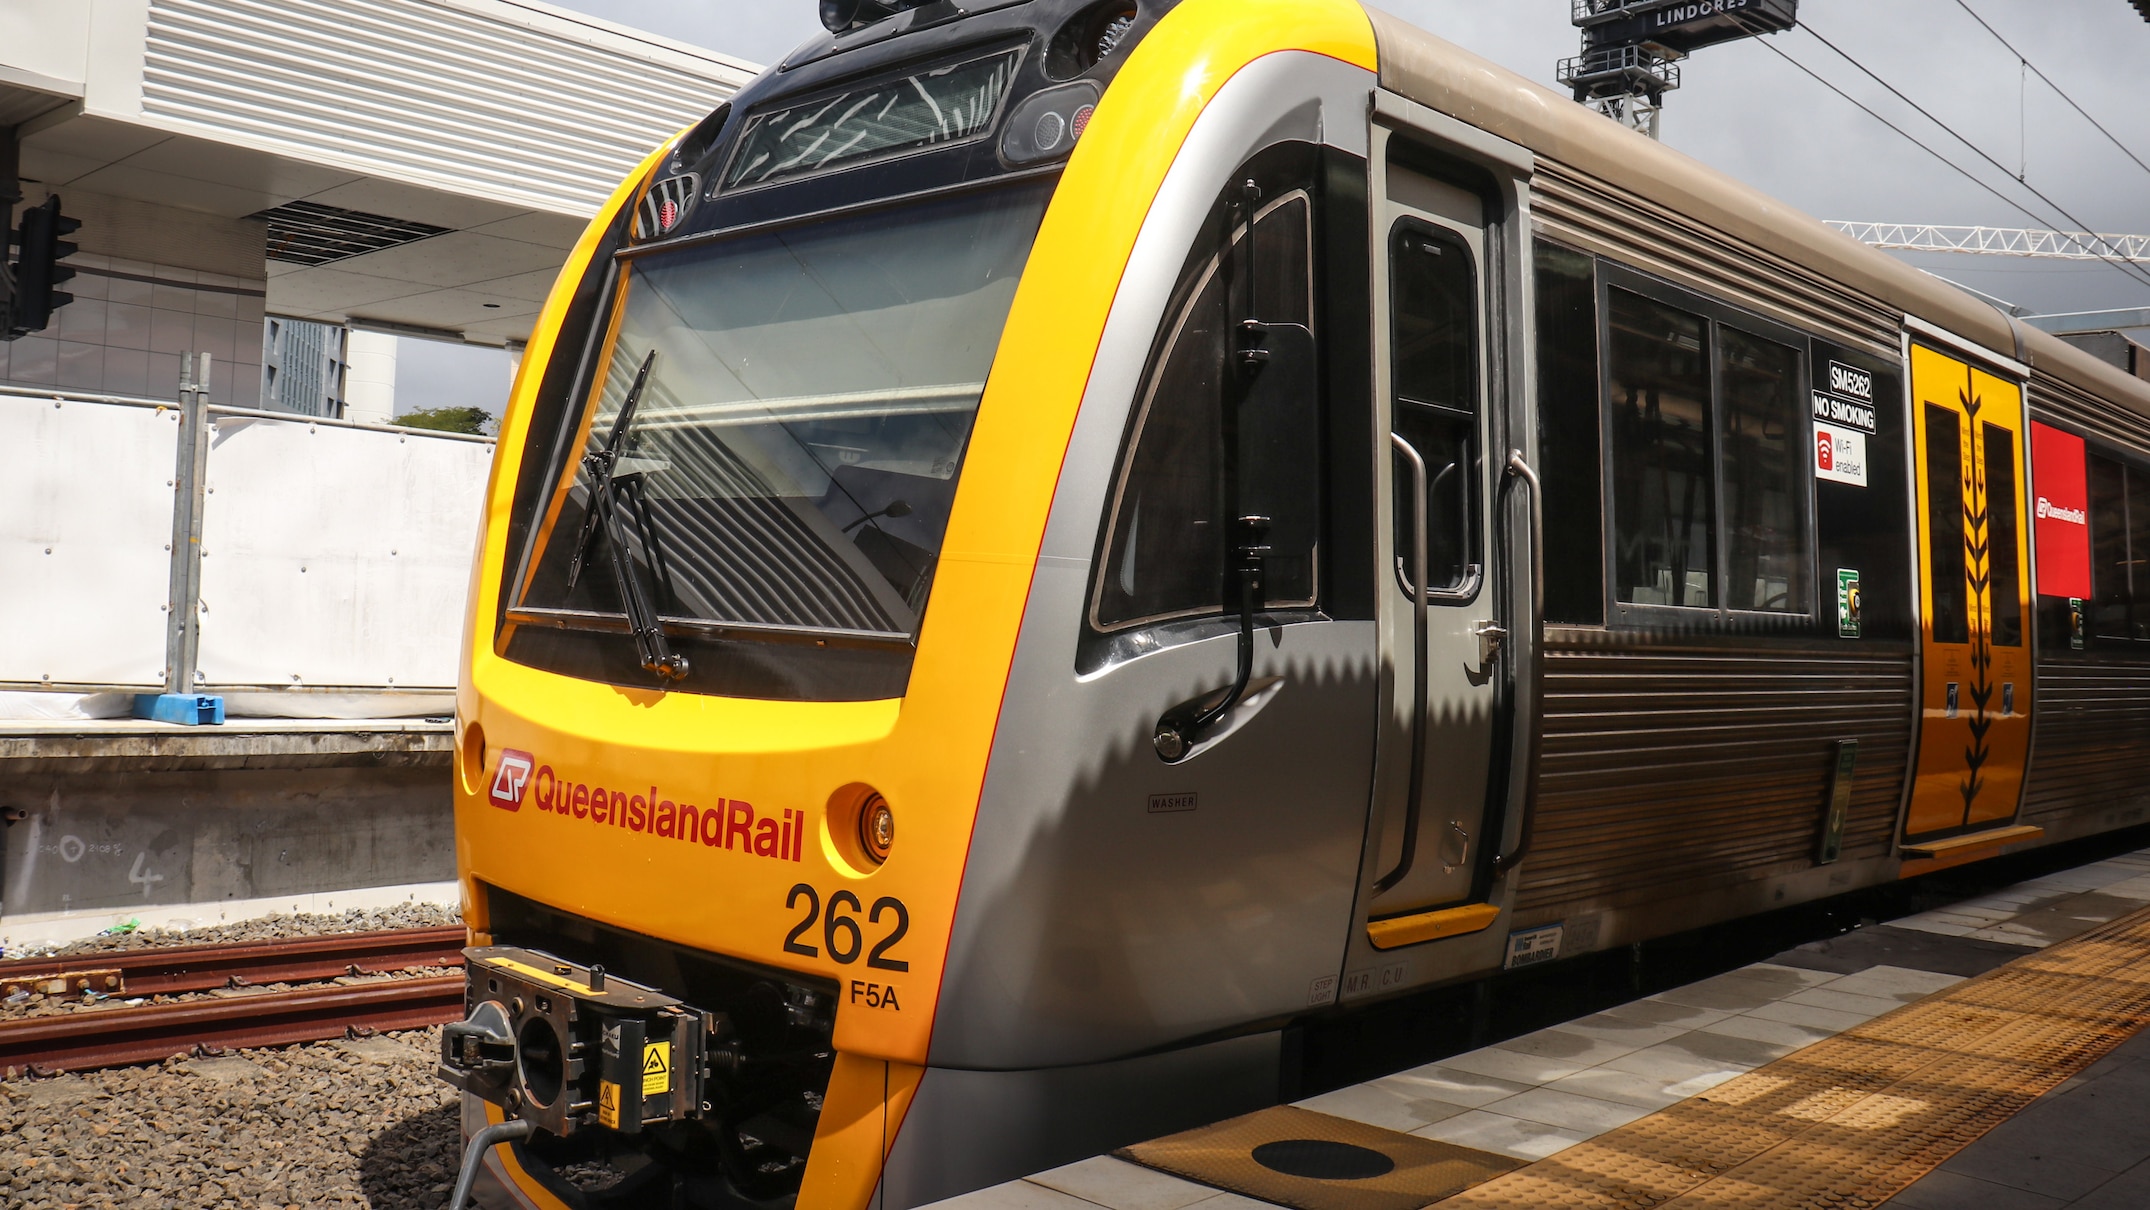 south east queensland train service closures for christmas, new year period